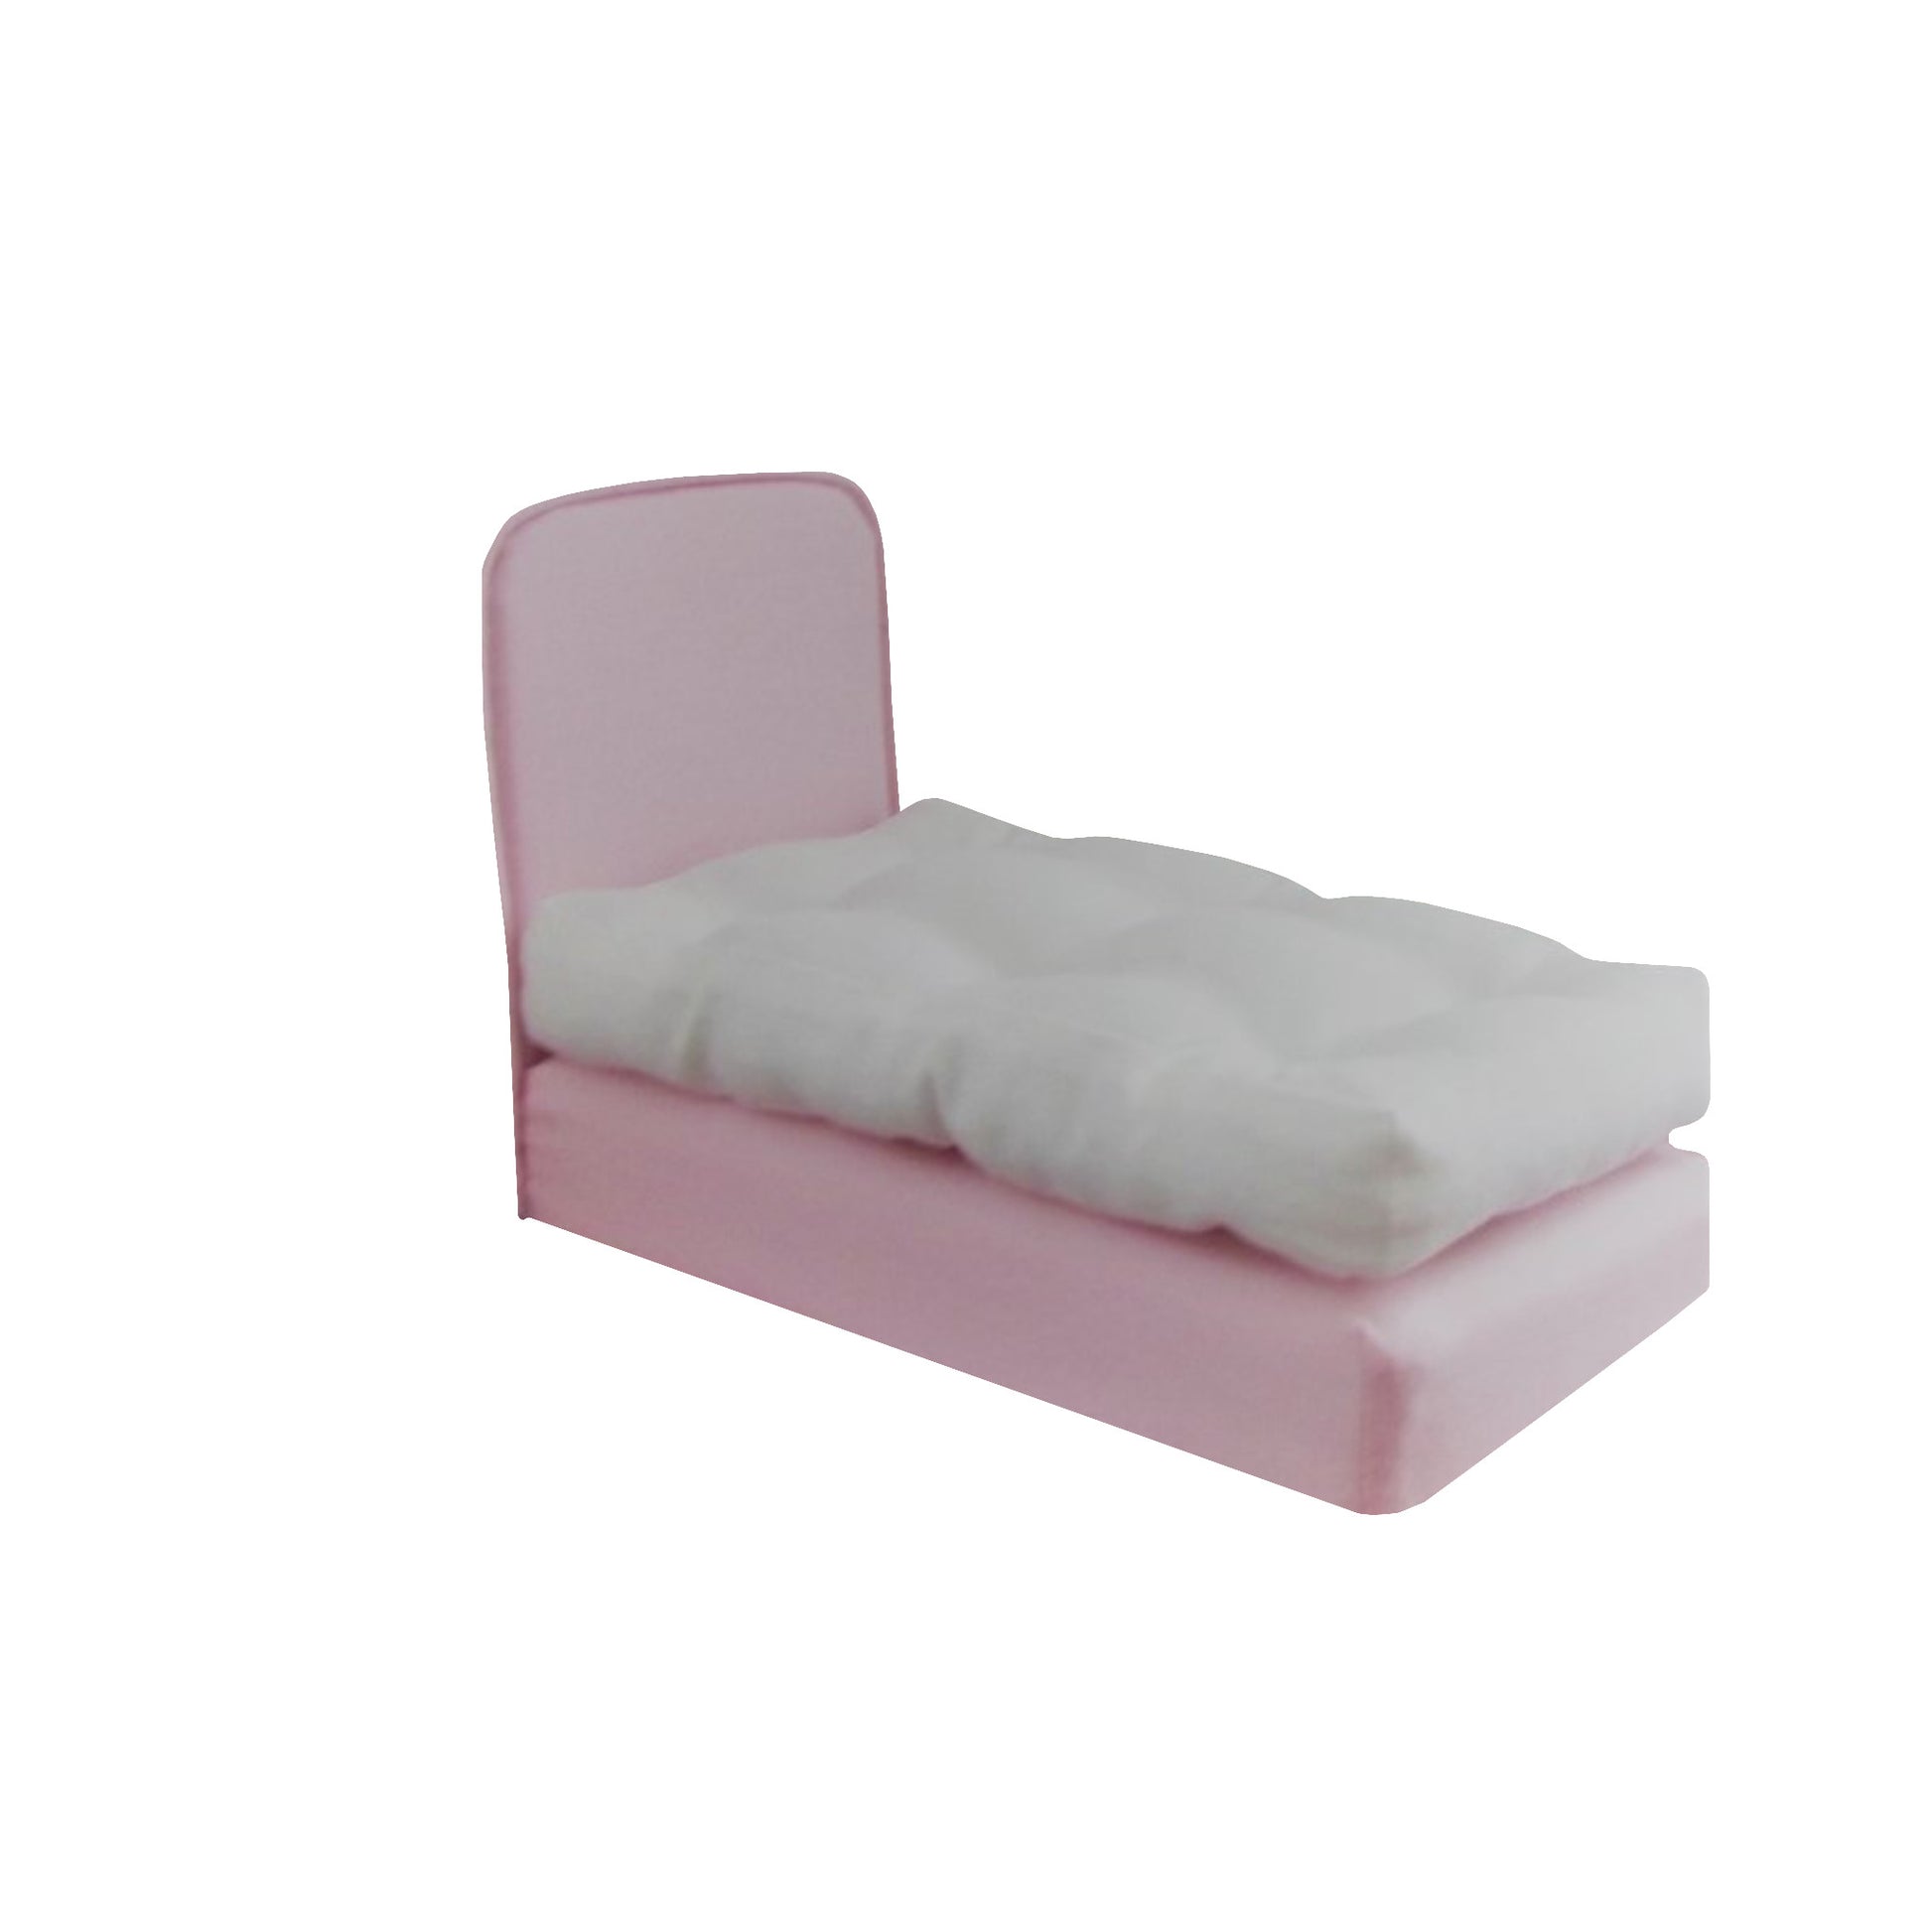 Light Pink Doll Bed and Mattress for Pink Silver Dots Doll Bedding for 6.5-inch dolls